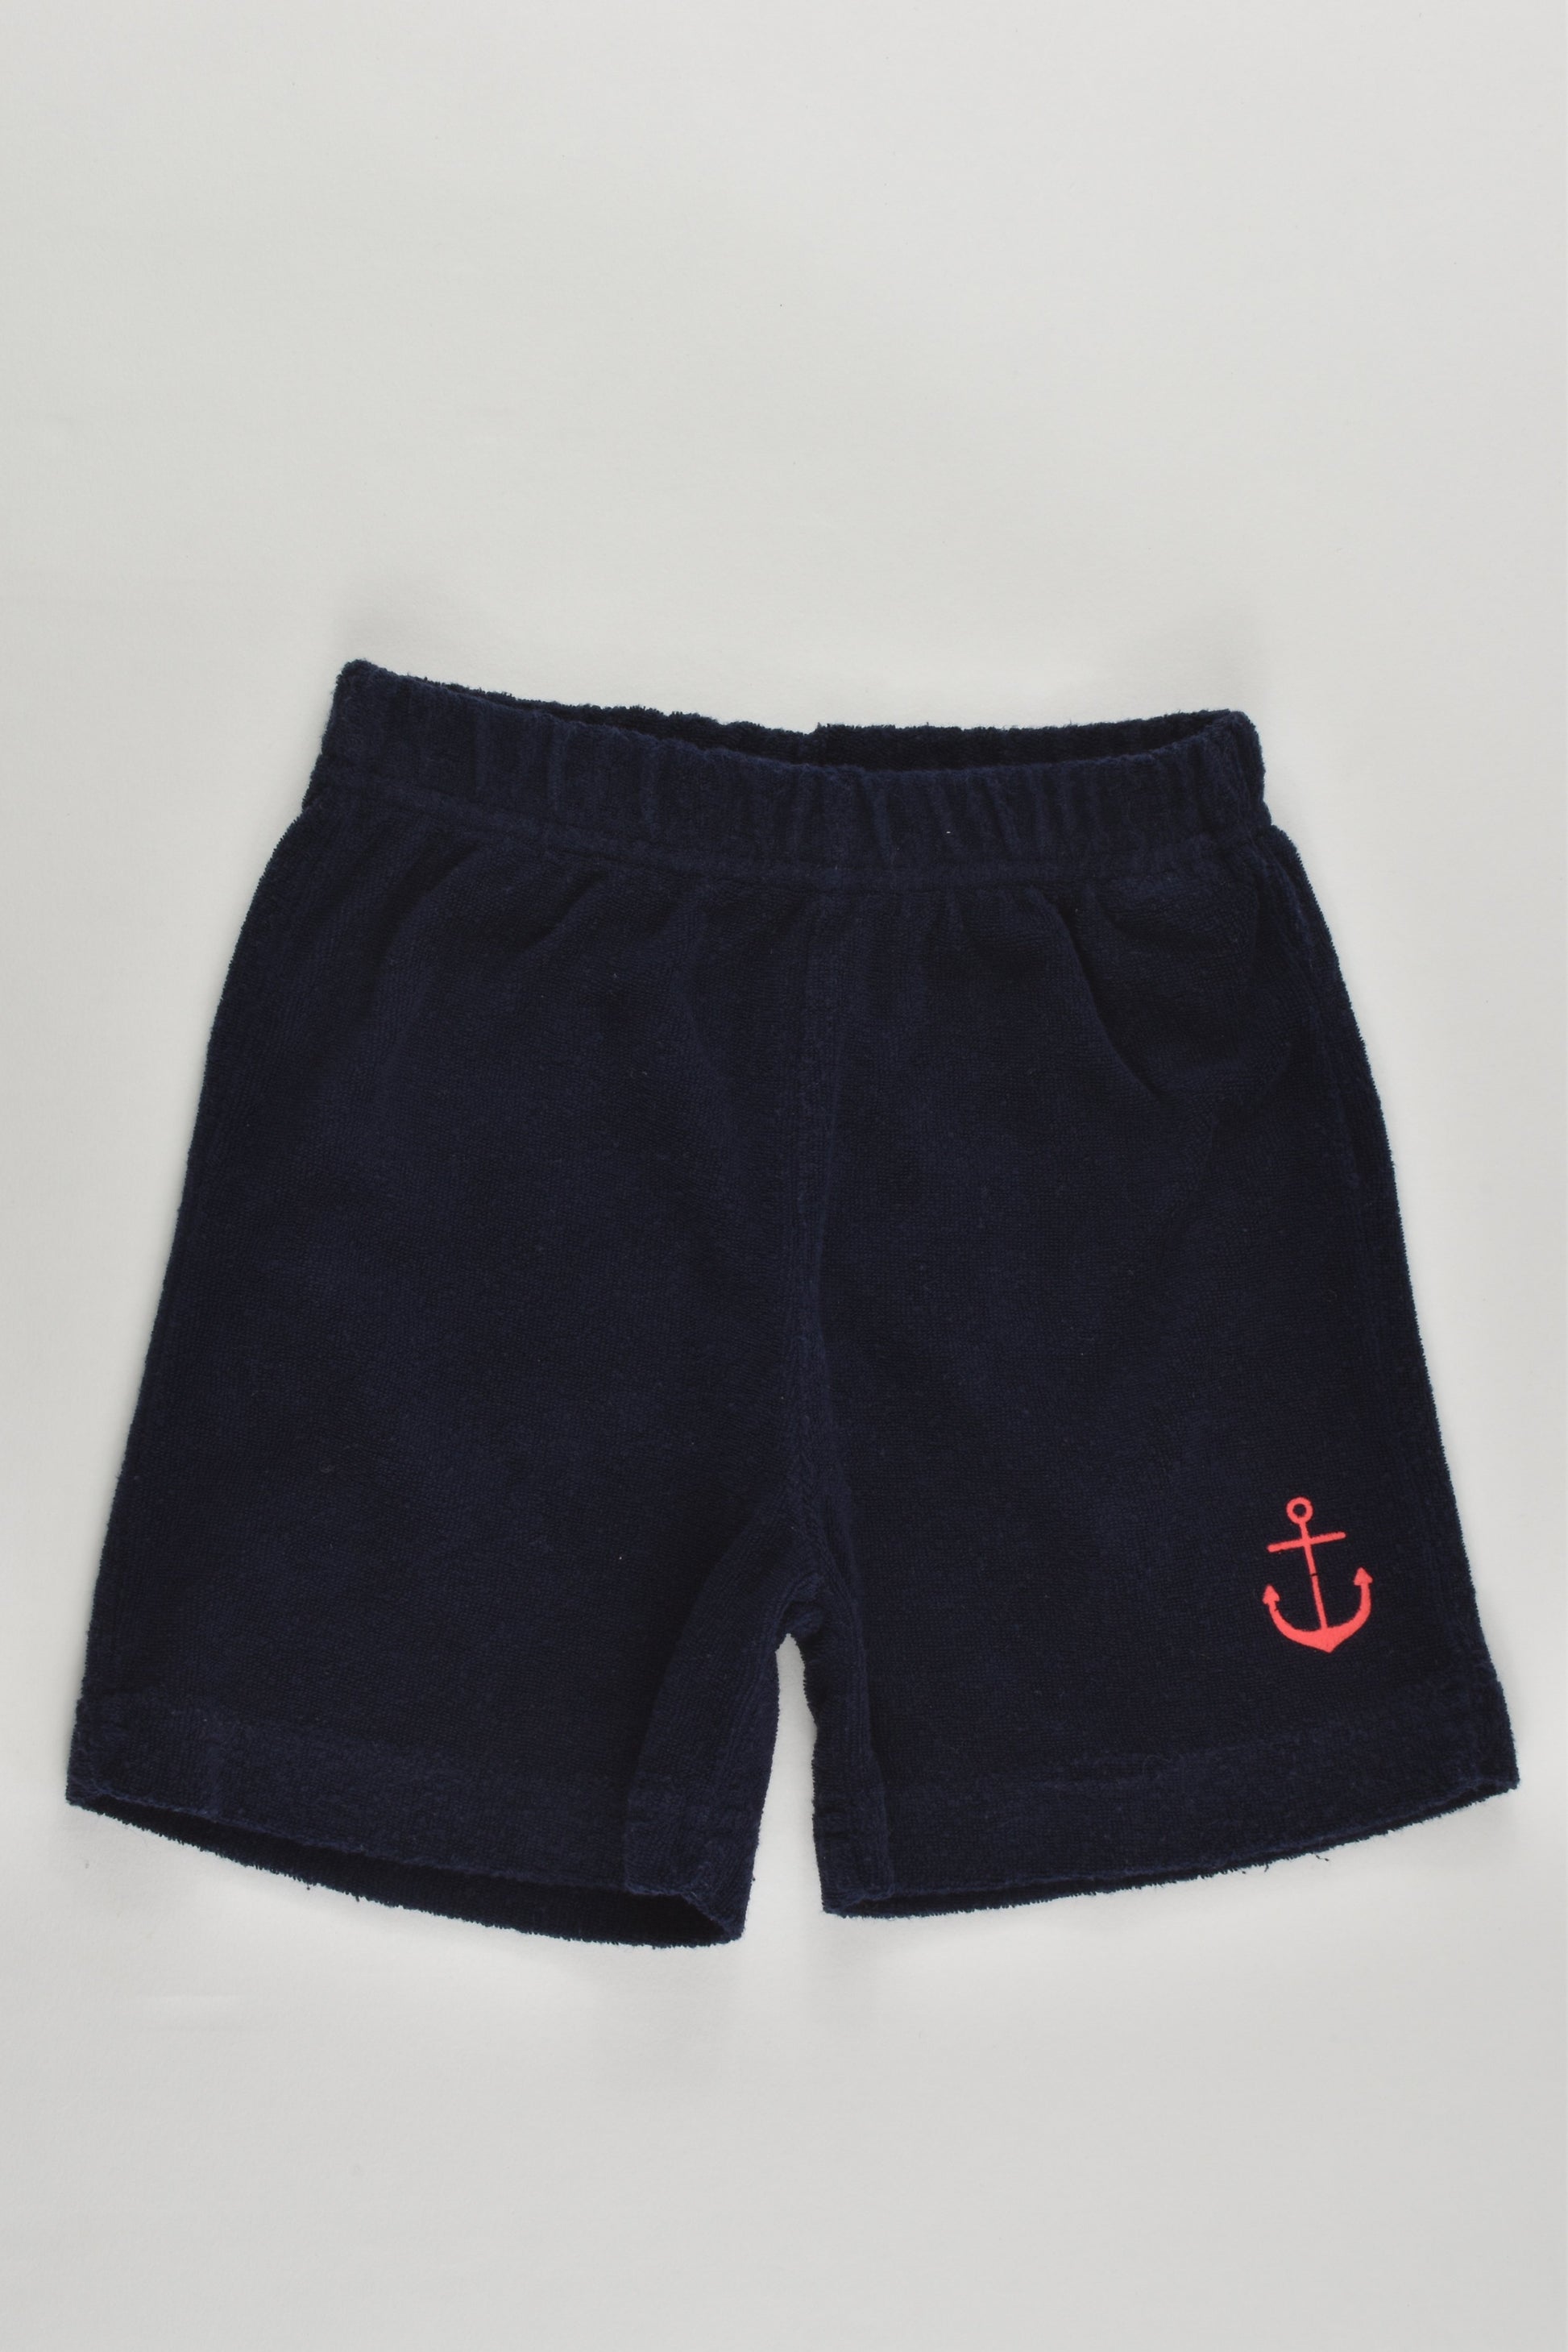 Brand Unknown (France) Size 0 (12 months) Anchor Terry Shorts